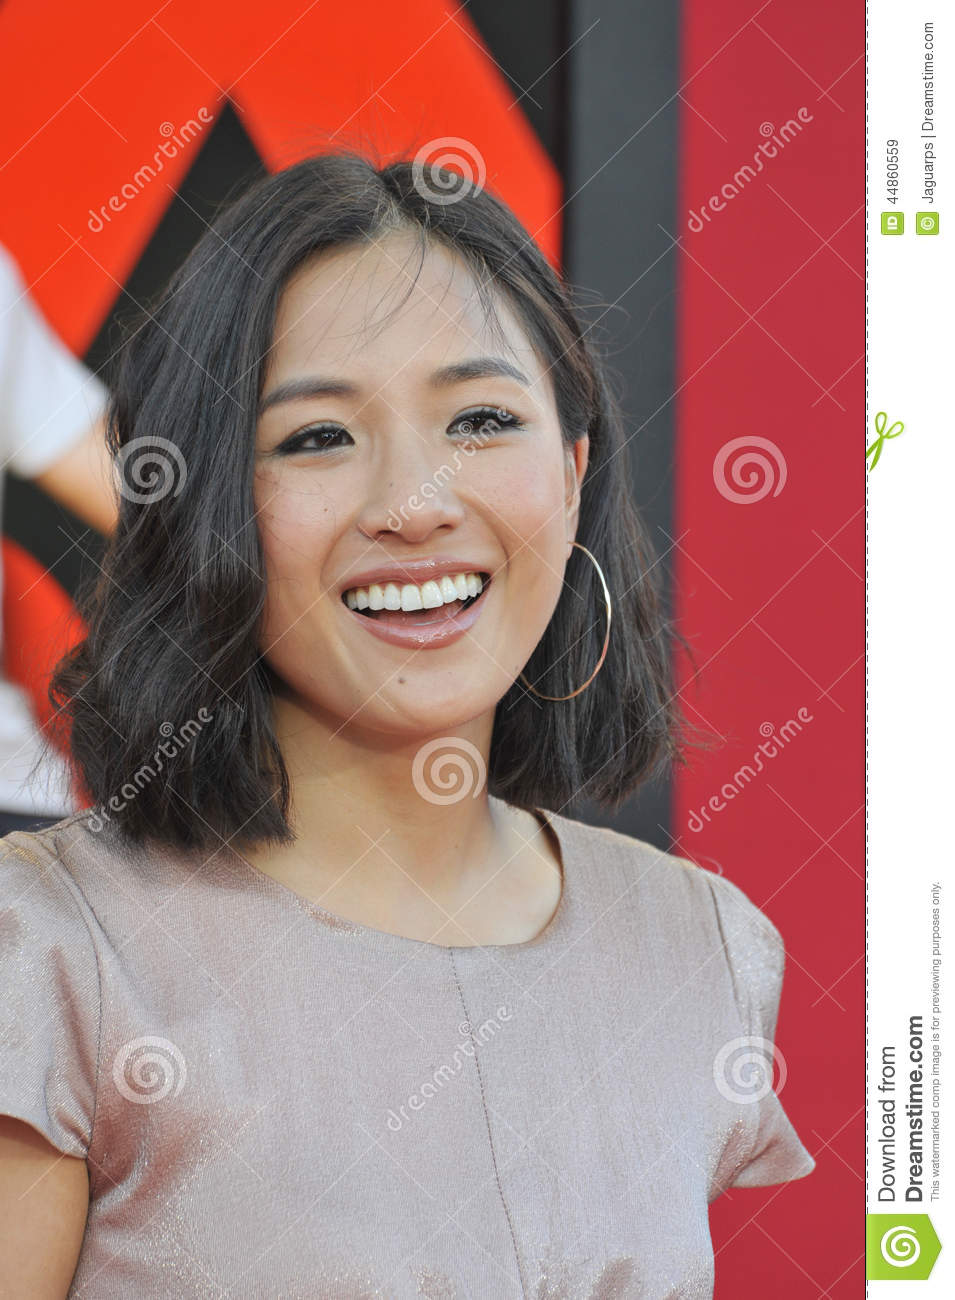 constance-wu-wallpapers